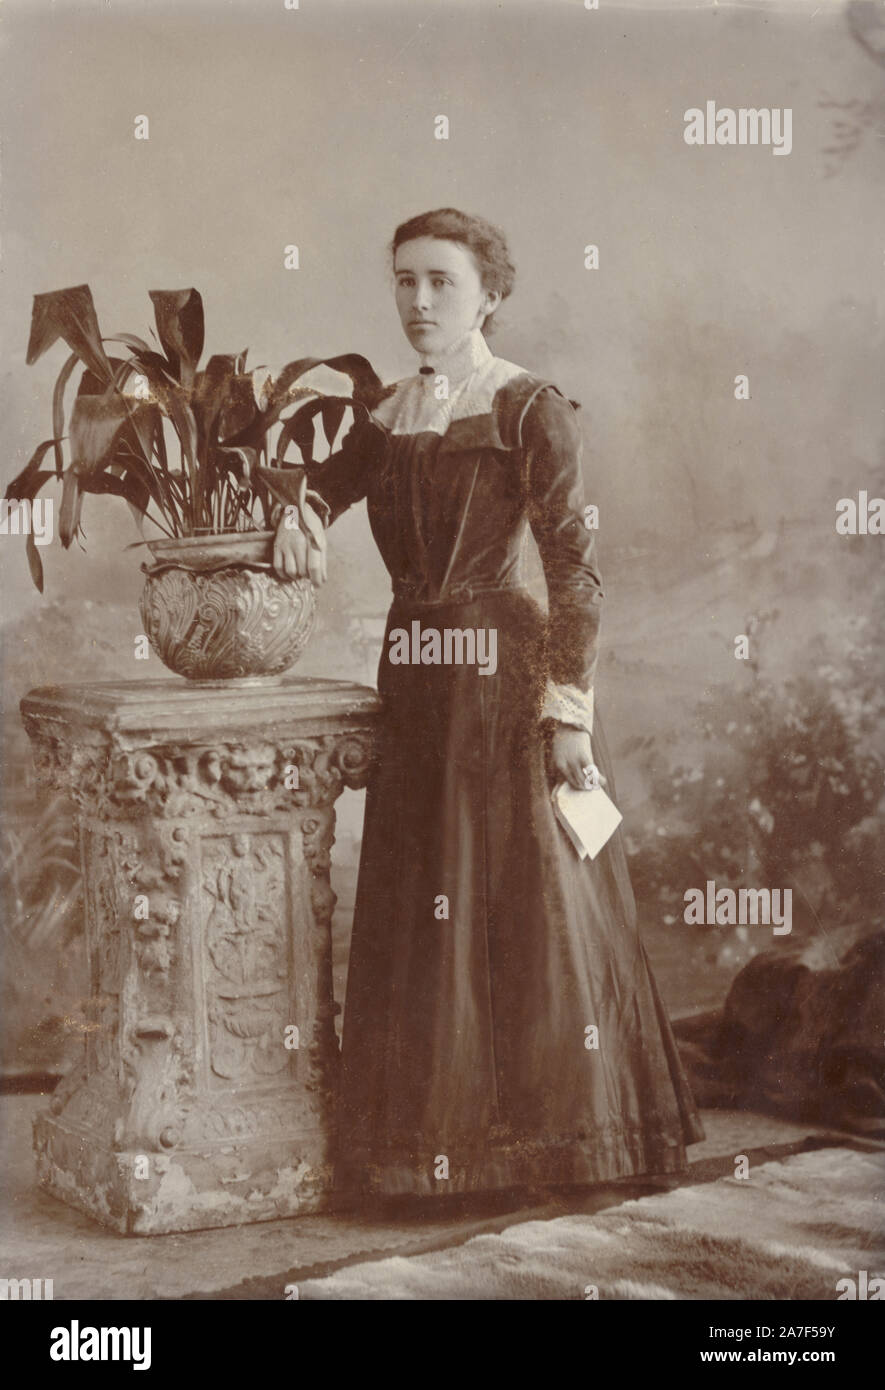 Late Victorian or early Edwardian cabinet photo card portrait of young Edwardian woman holding a letter and wearing a sombre, dark dress, posing next to potted plant - an aspidistra which were popular plants at this time. circa 1901, Truro, Cornwall, U.K. Stock Photo